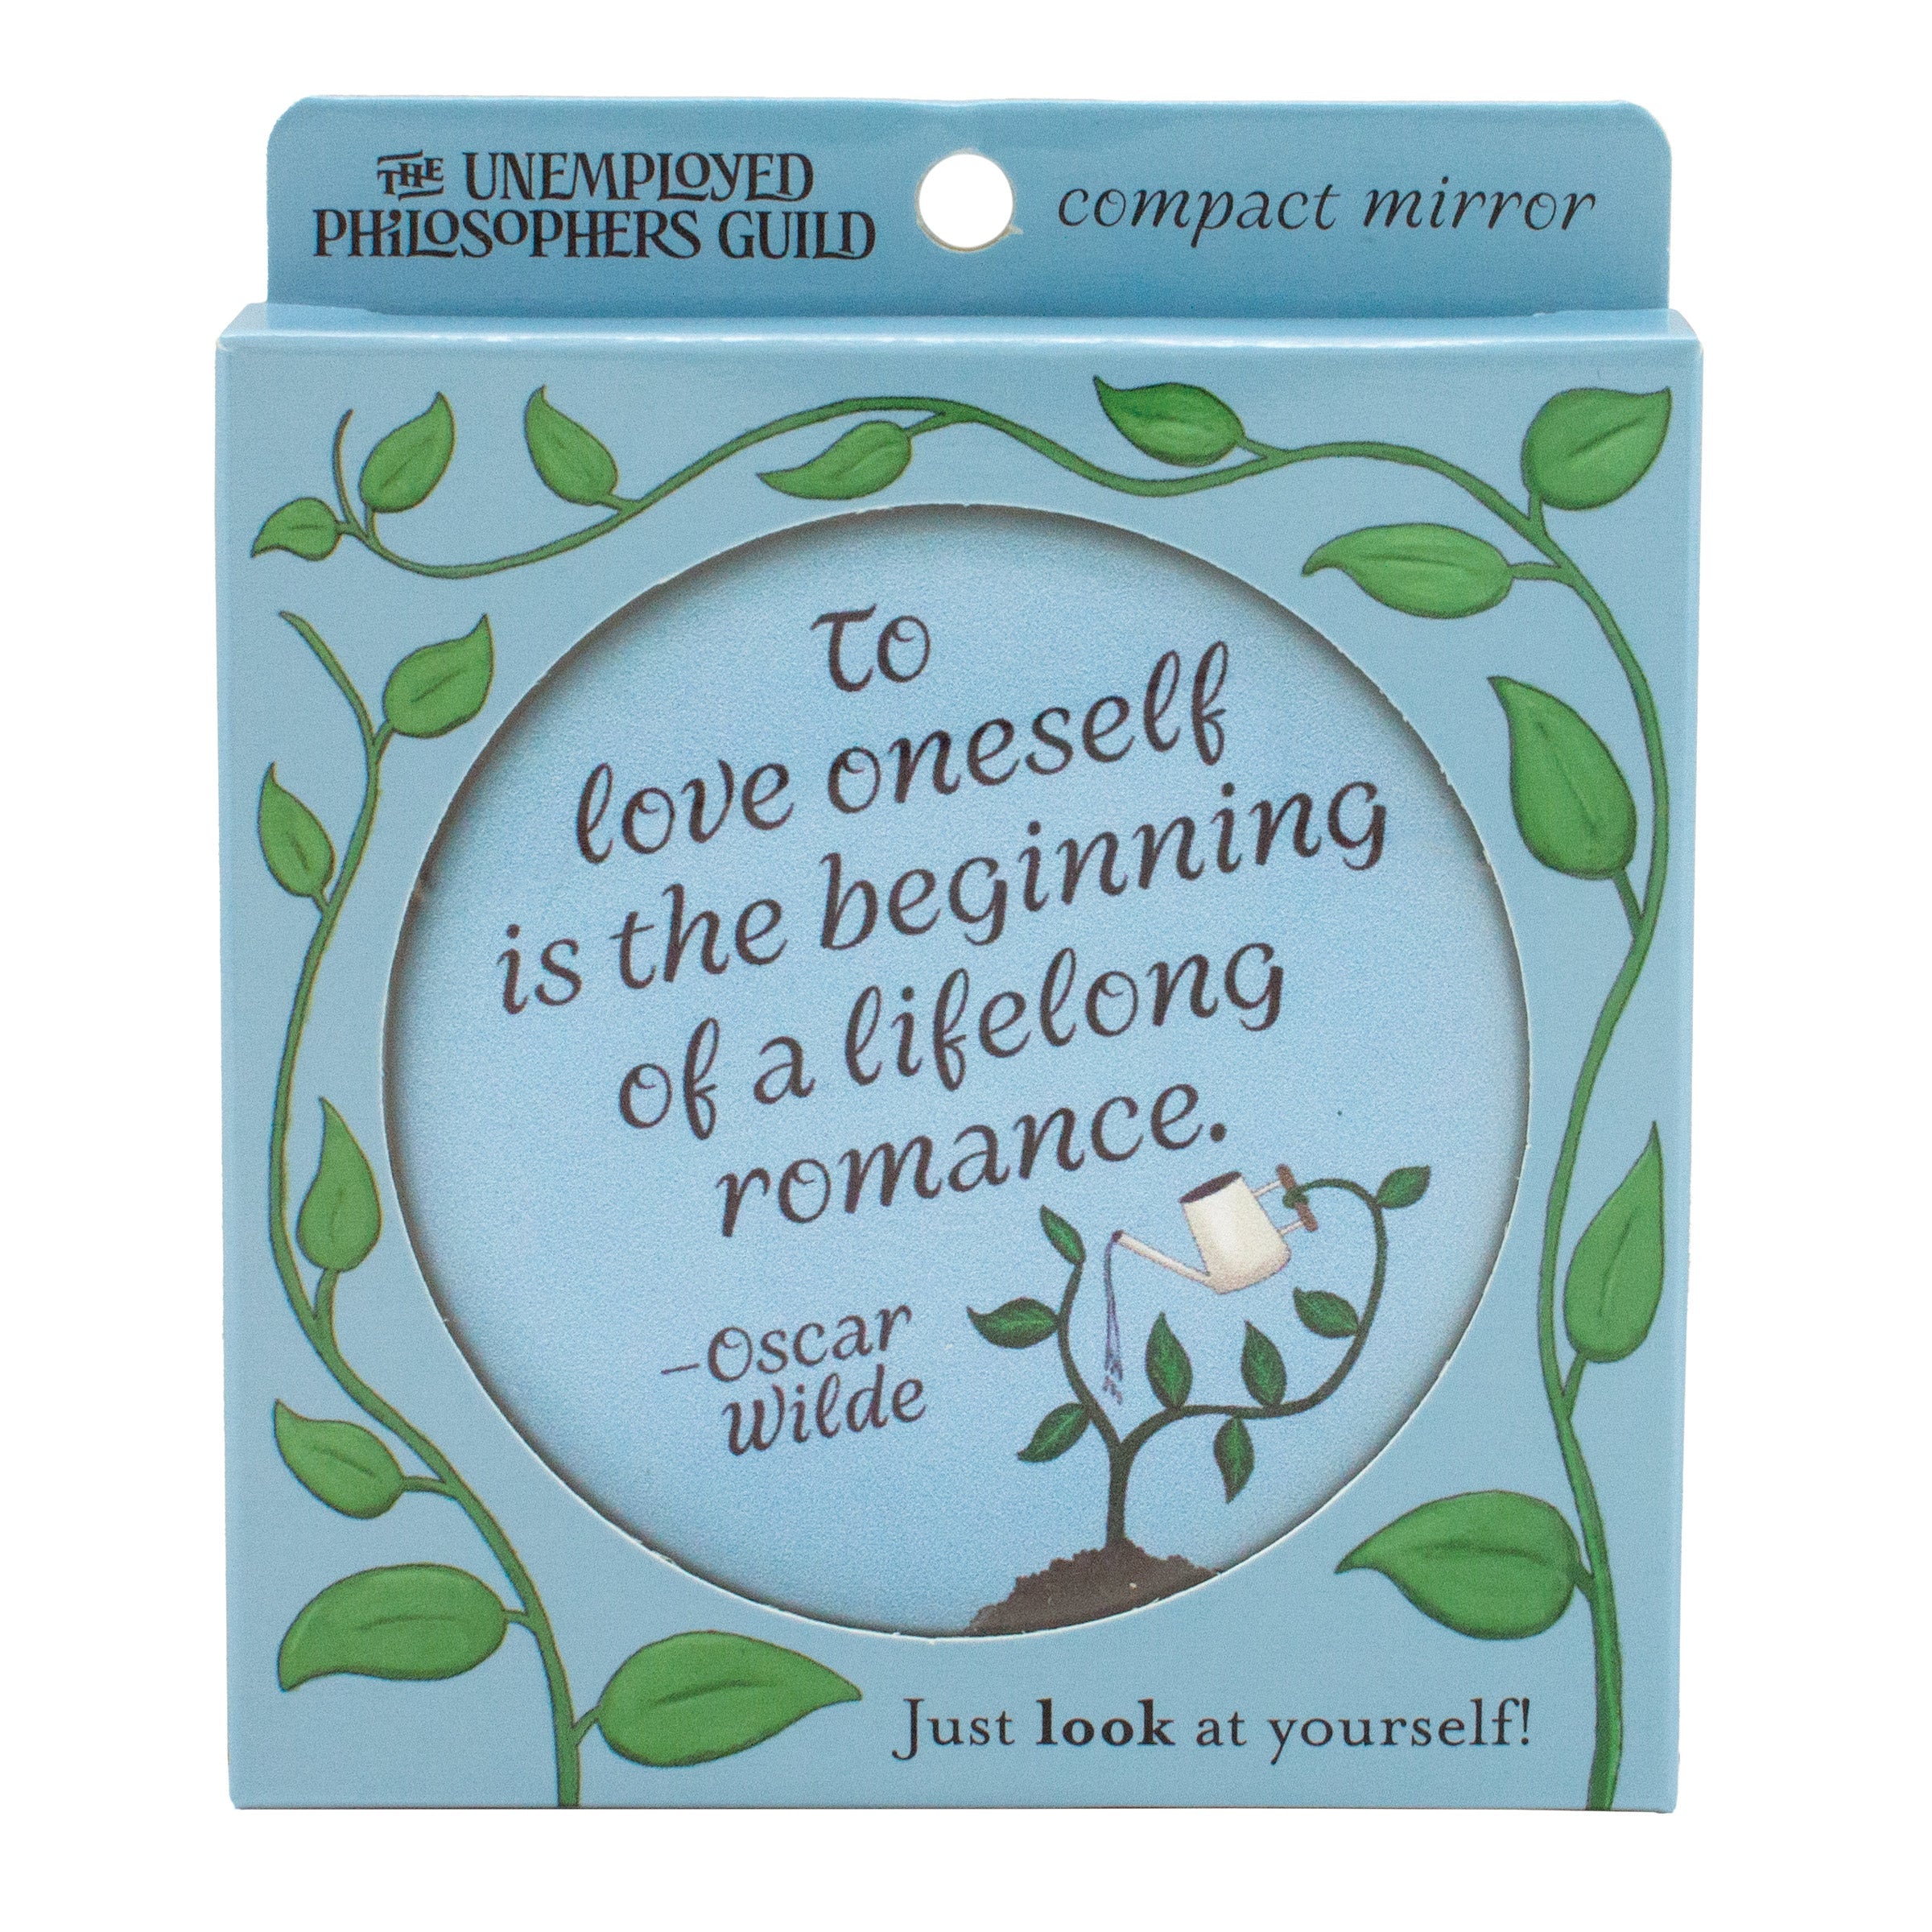 Product photo of Oscar Wilde To Love Oneself Compact Mirror, a novelty gift manufactured by The Unemployed Philosophers Guild.